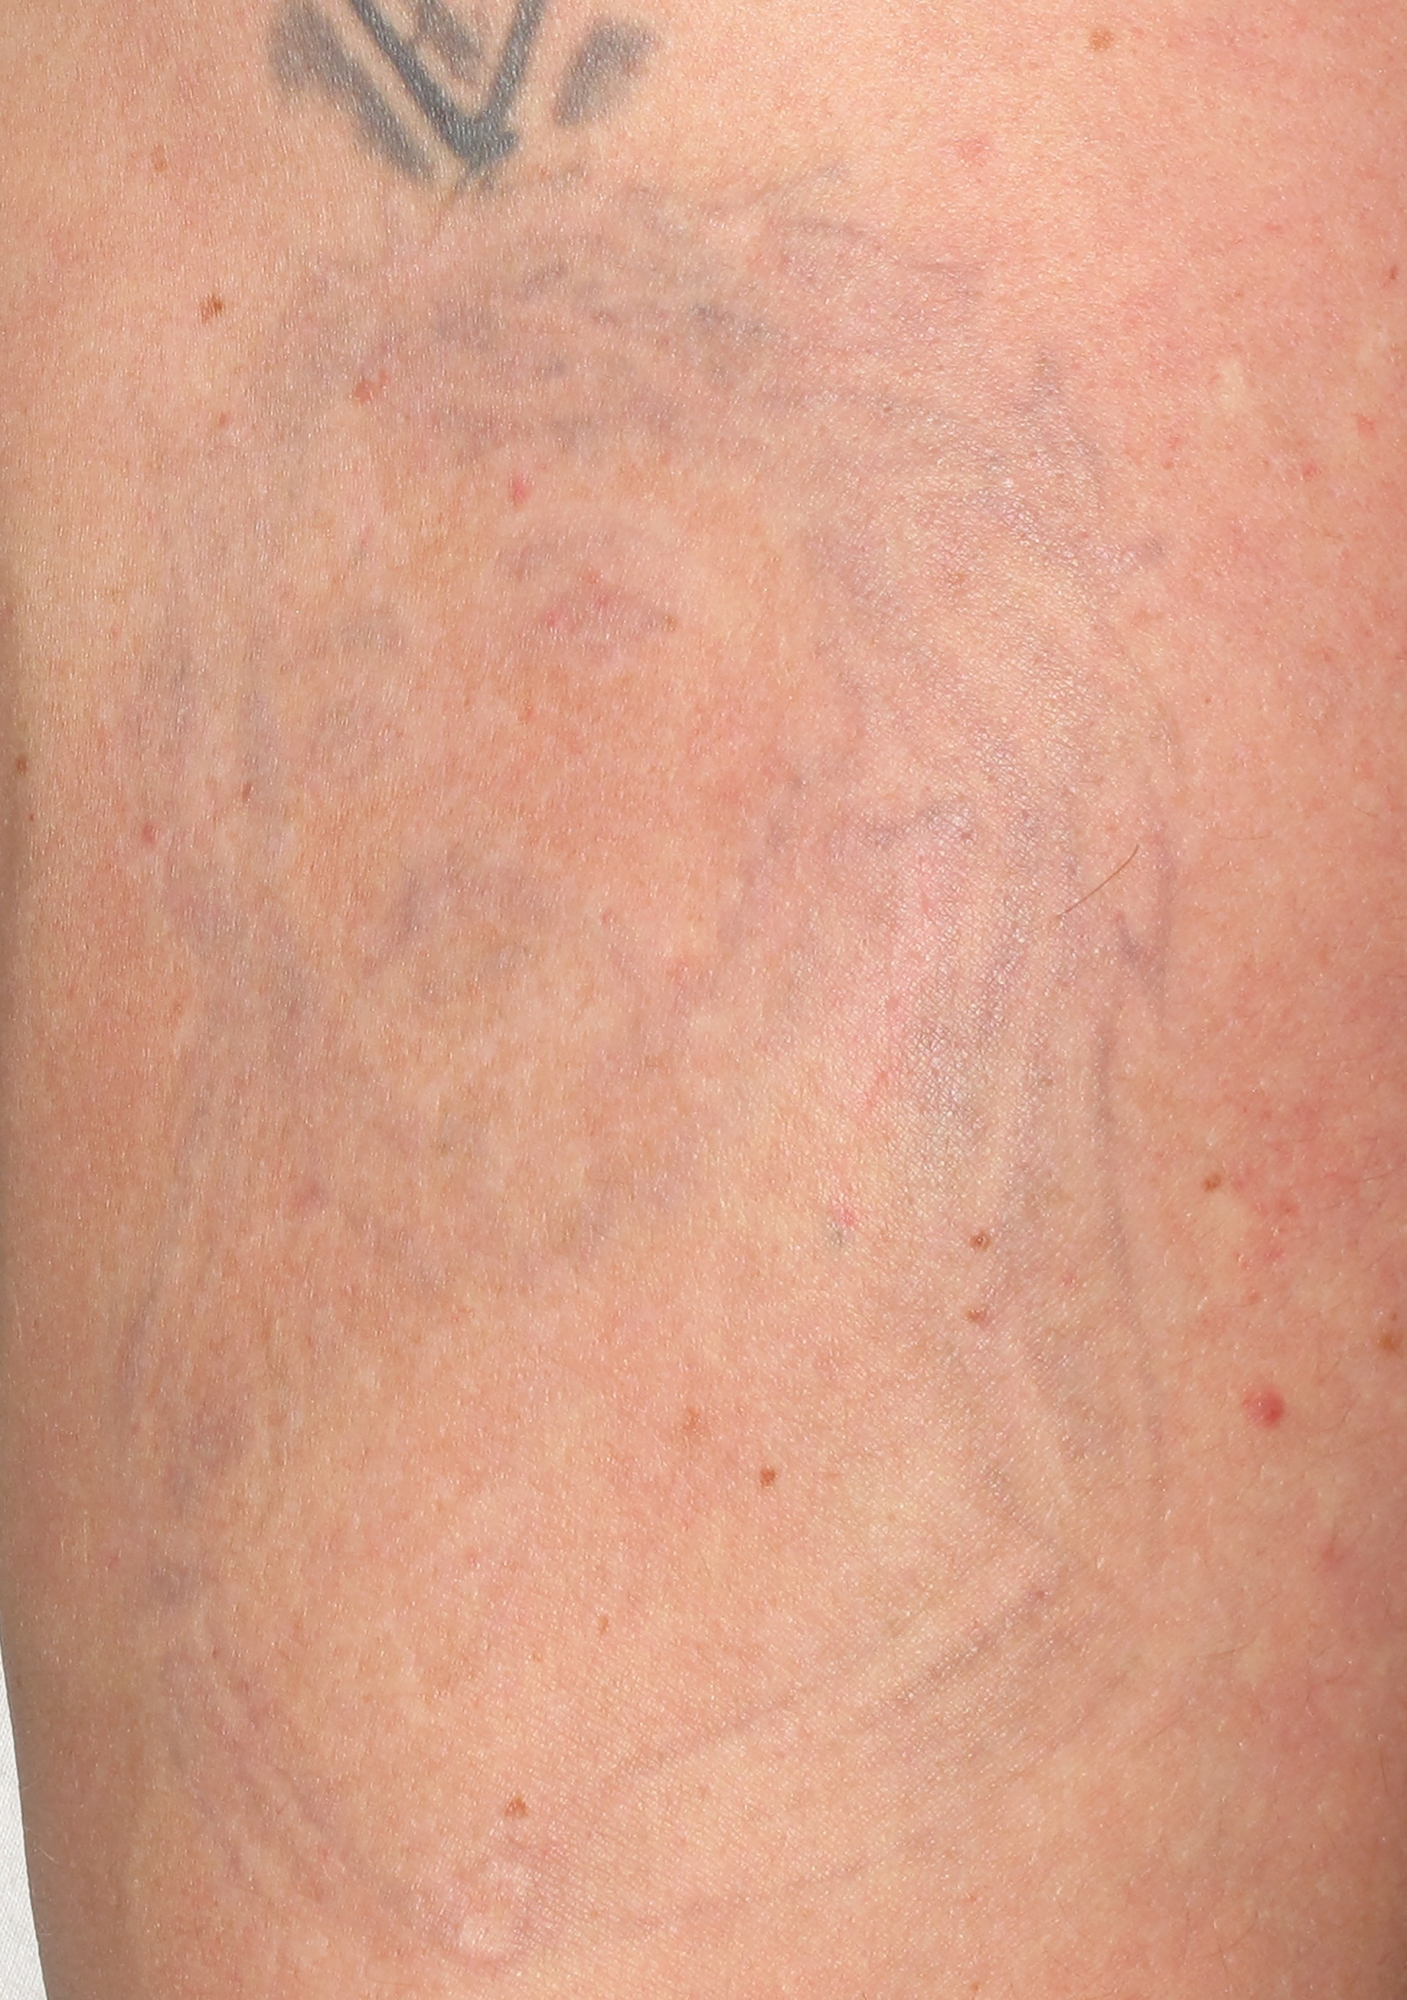 tattoo after treatment with the Spectra laser in Altoona and State College, Pennsylvania